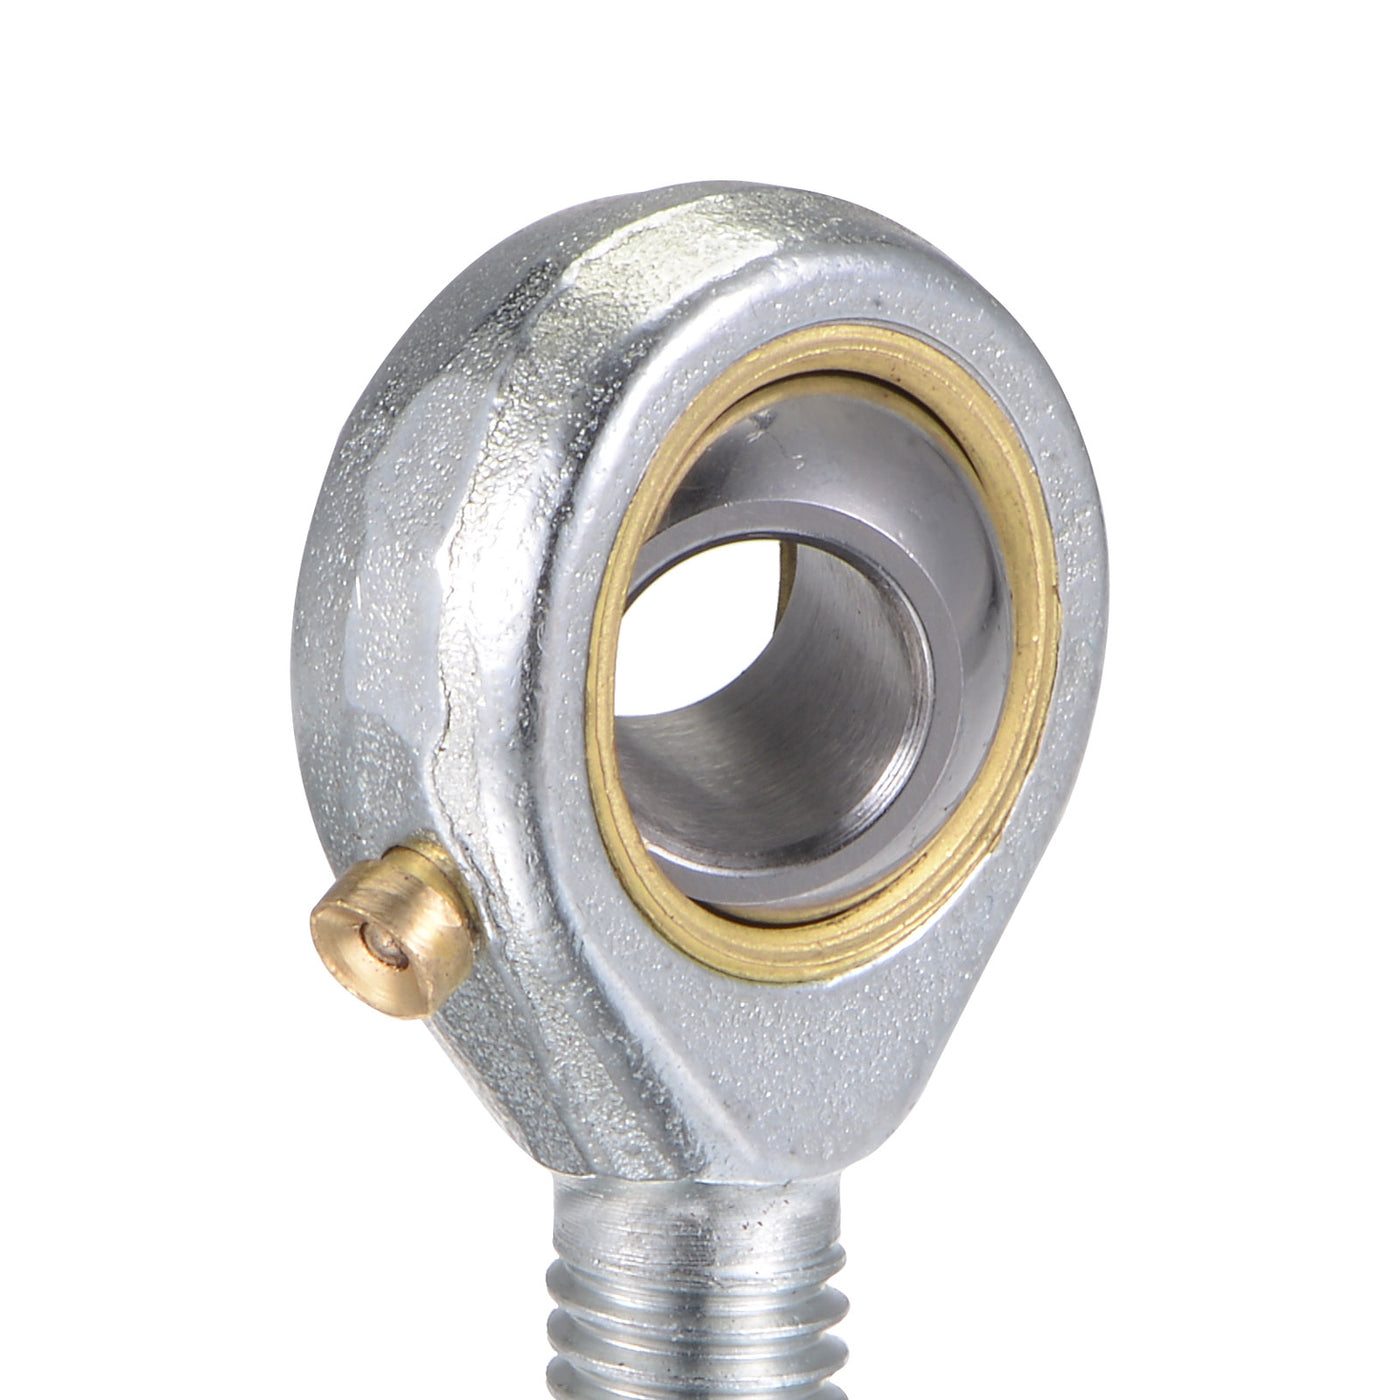 uxcell Uxcell POS8 Rod End Bearing 8mm Bore Self-lubricated M8x1.25 Left Hand Male Thread